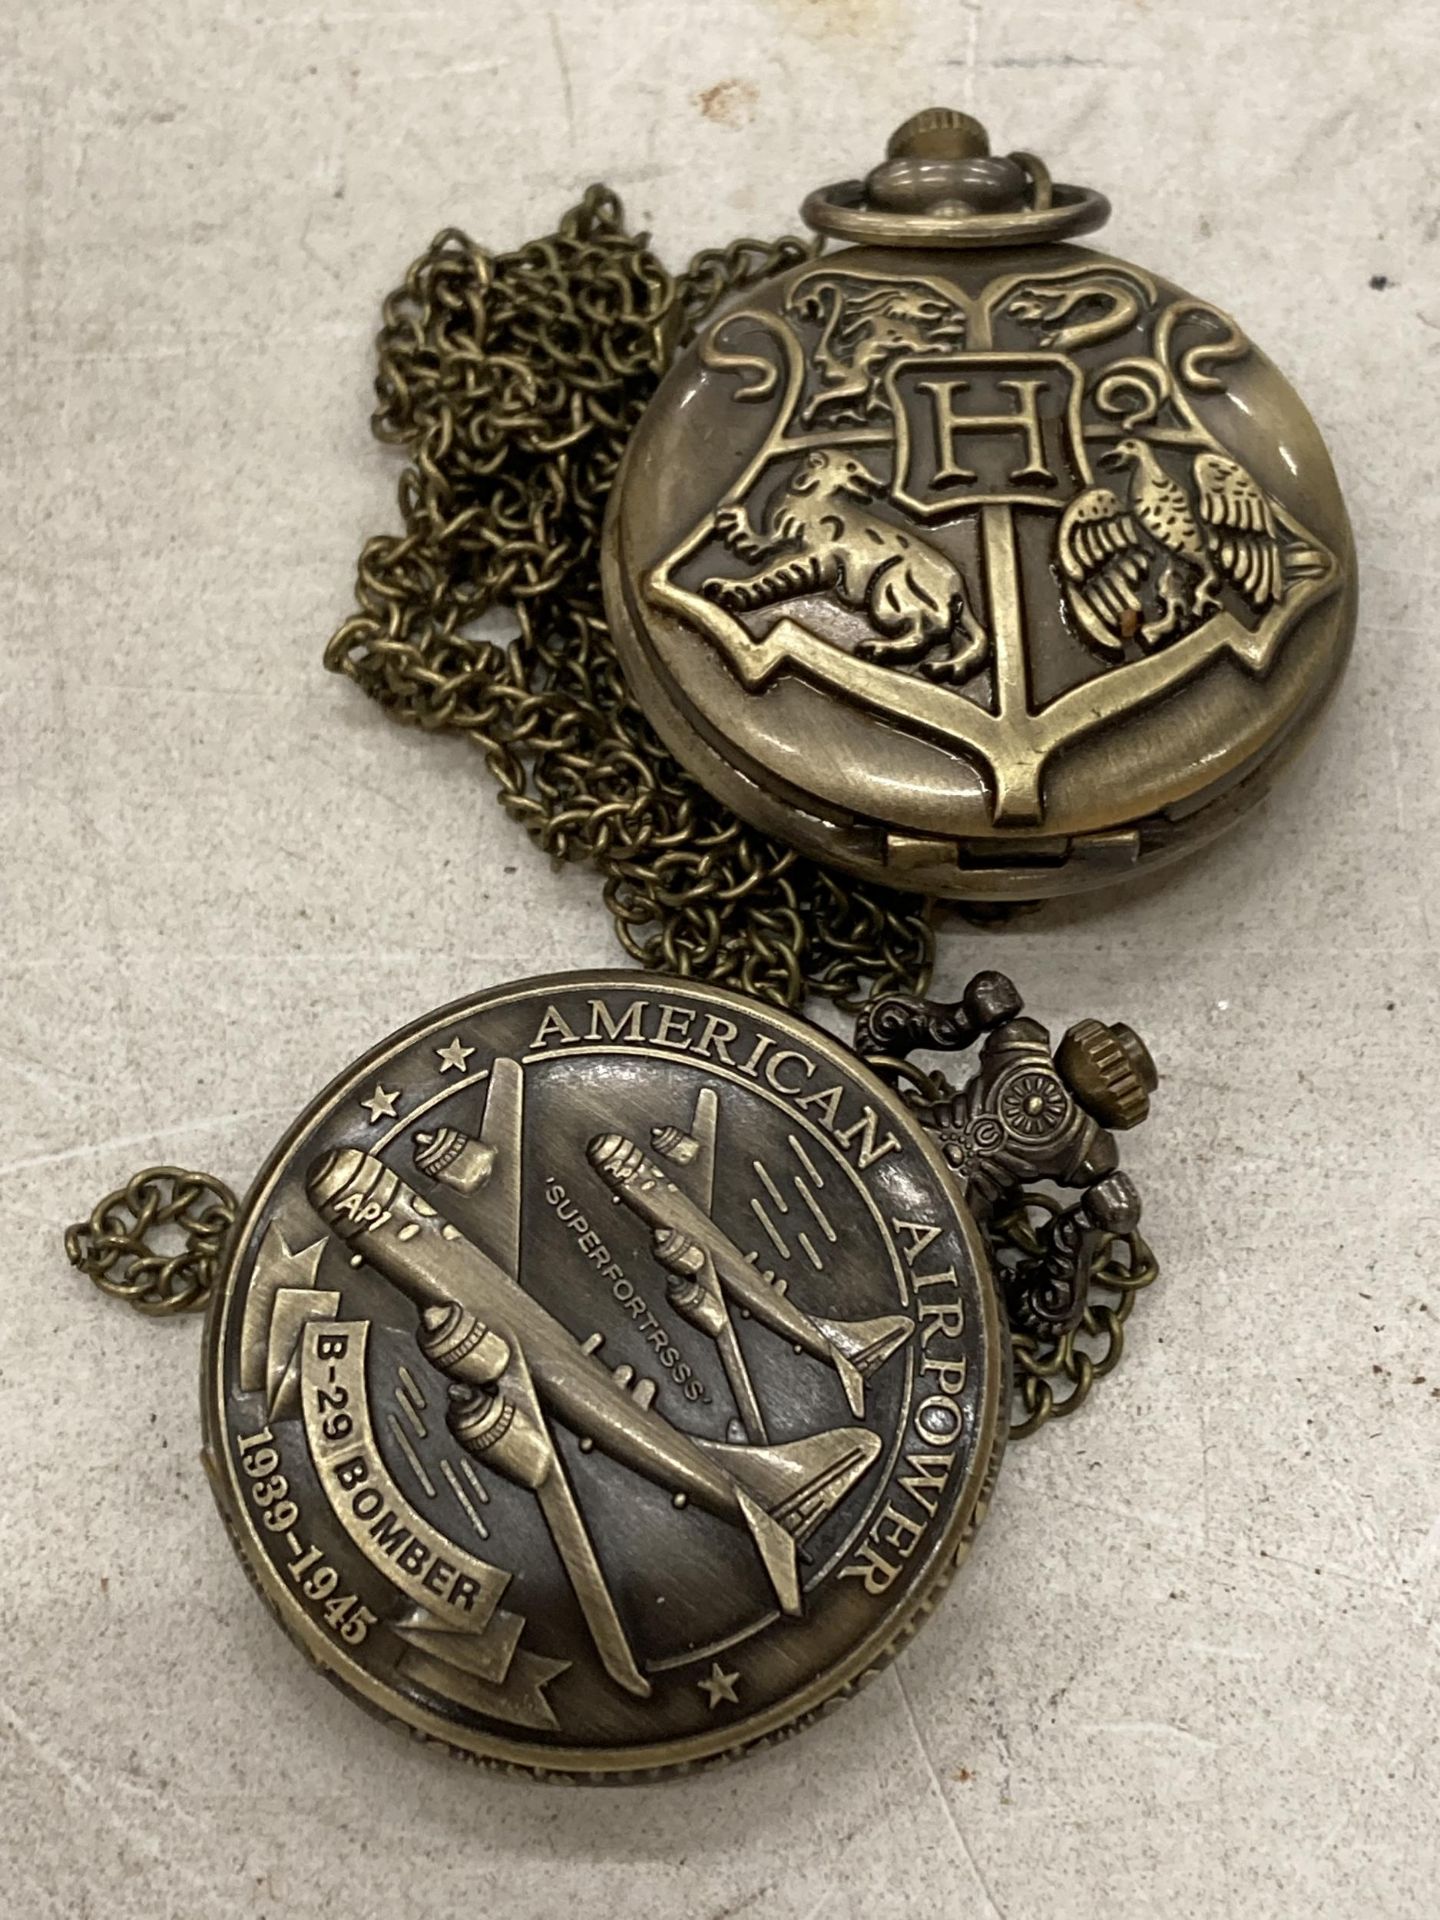 TWO POCKET WATCHES WITH IMAGES OF A USA BOMBER AND A COAT OF ARMS